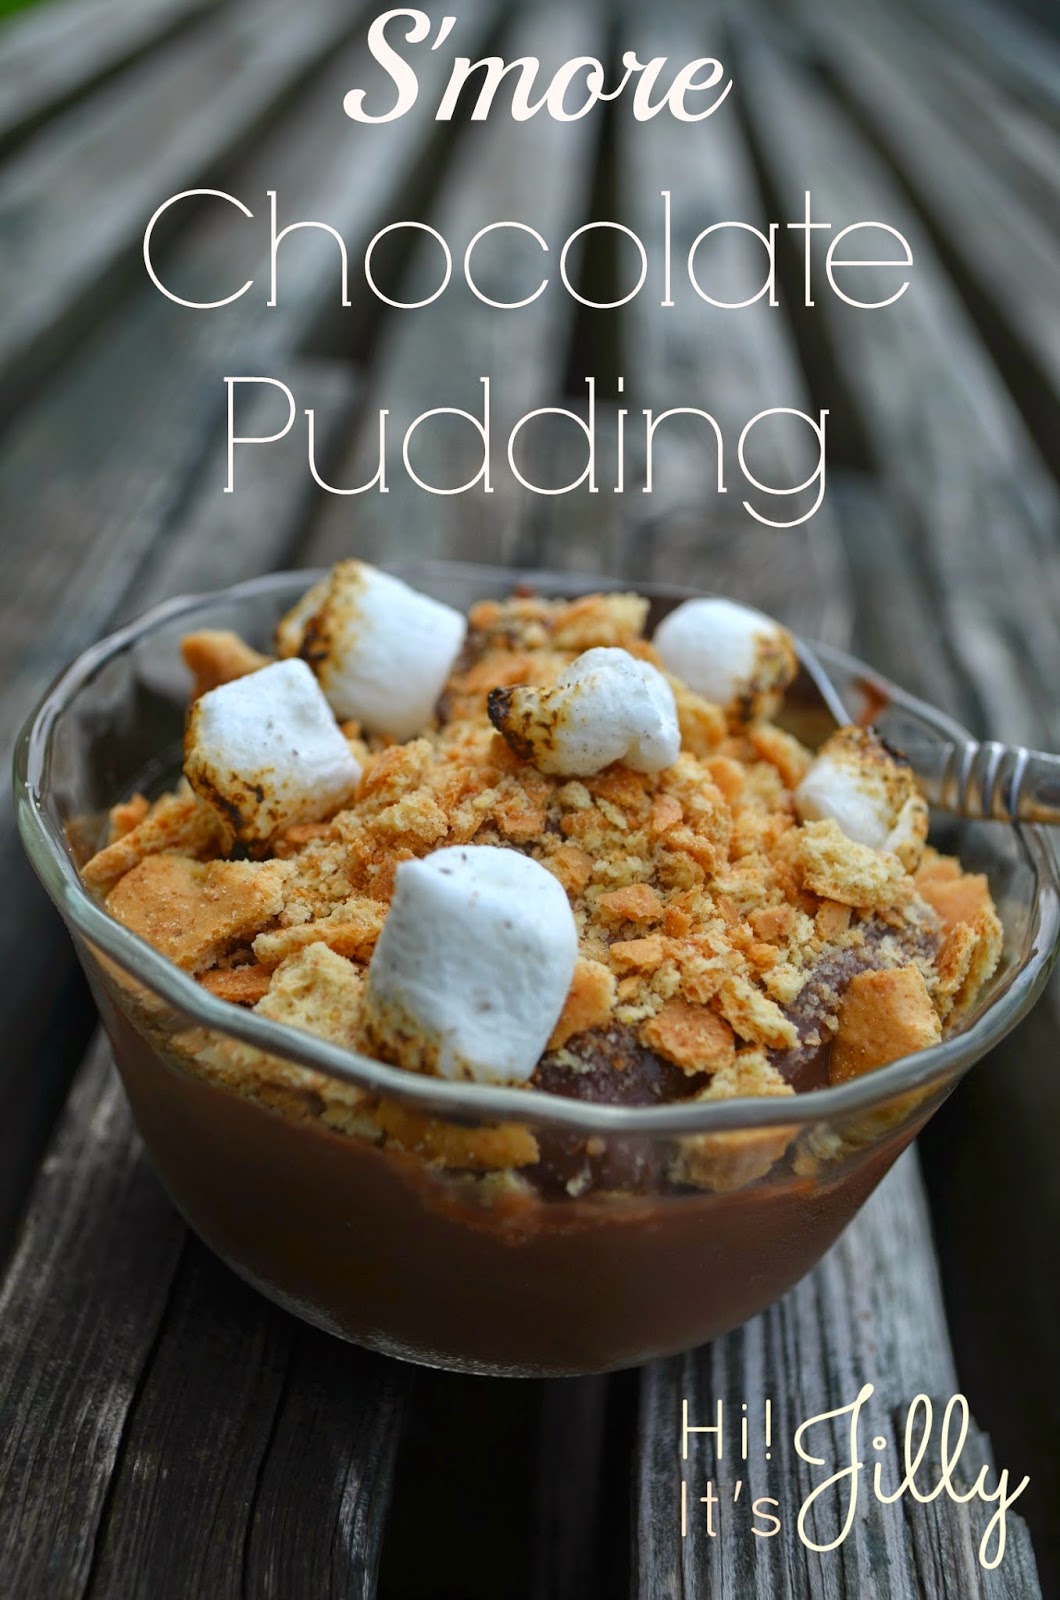 Add some toasted marshmallows and graham crackers to your Kozy Shack chocolate pudding for a s'more in a bowl!! #puddinglove #yum #smores